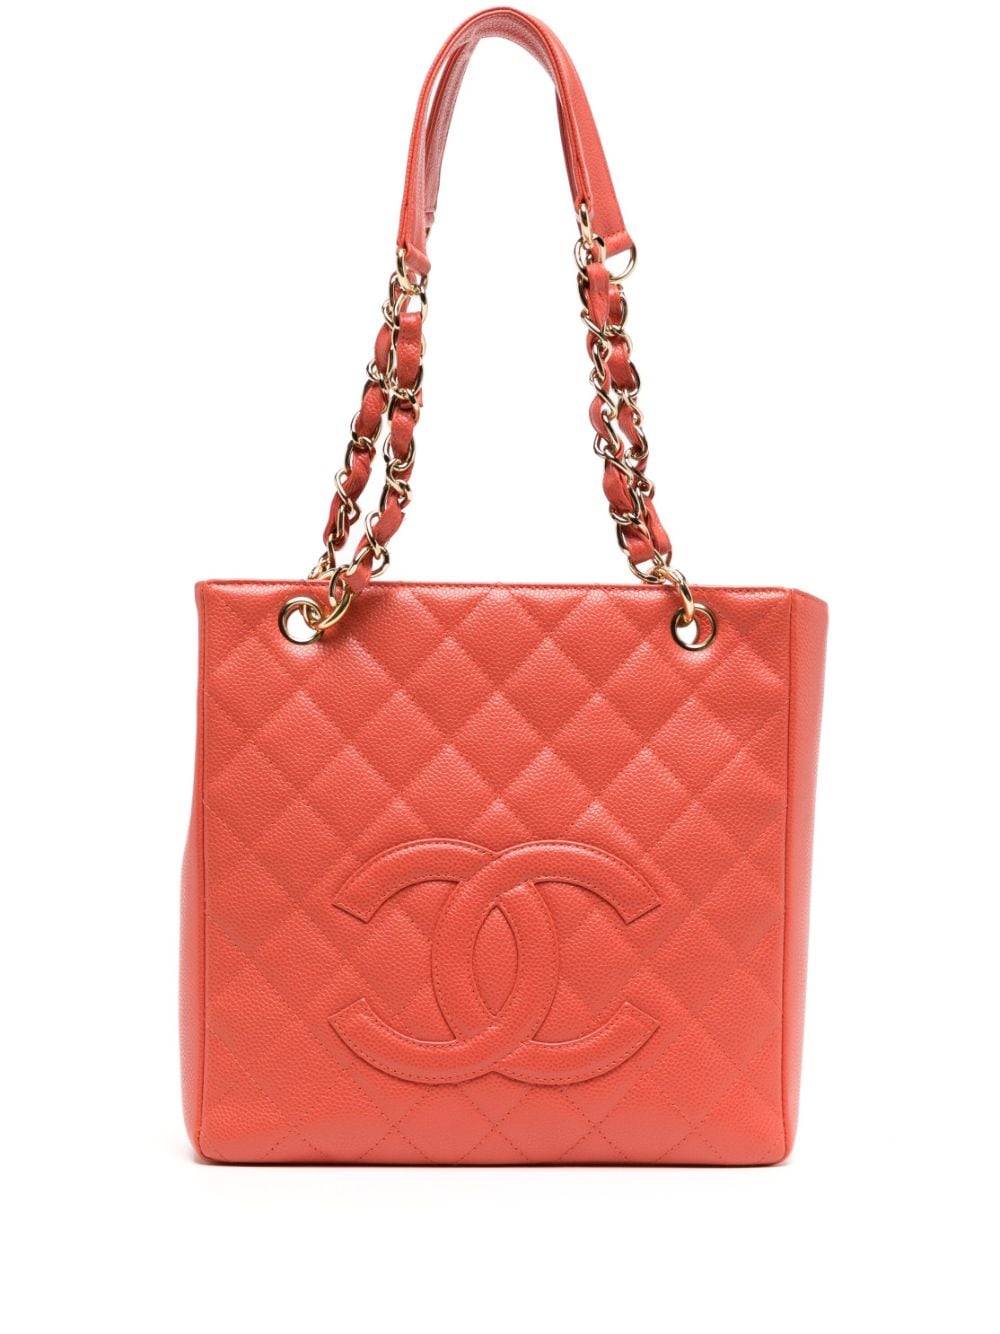 CHANEL Pre-Owned 2003 Petit Shopping Handtasche - Orange von CHANEL Pre-Owned